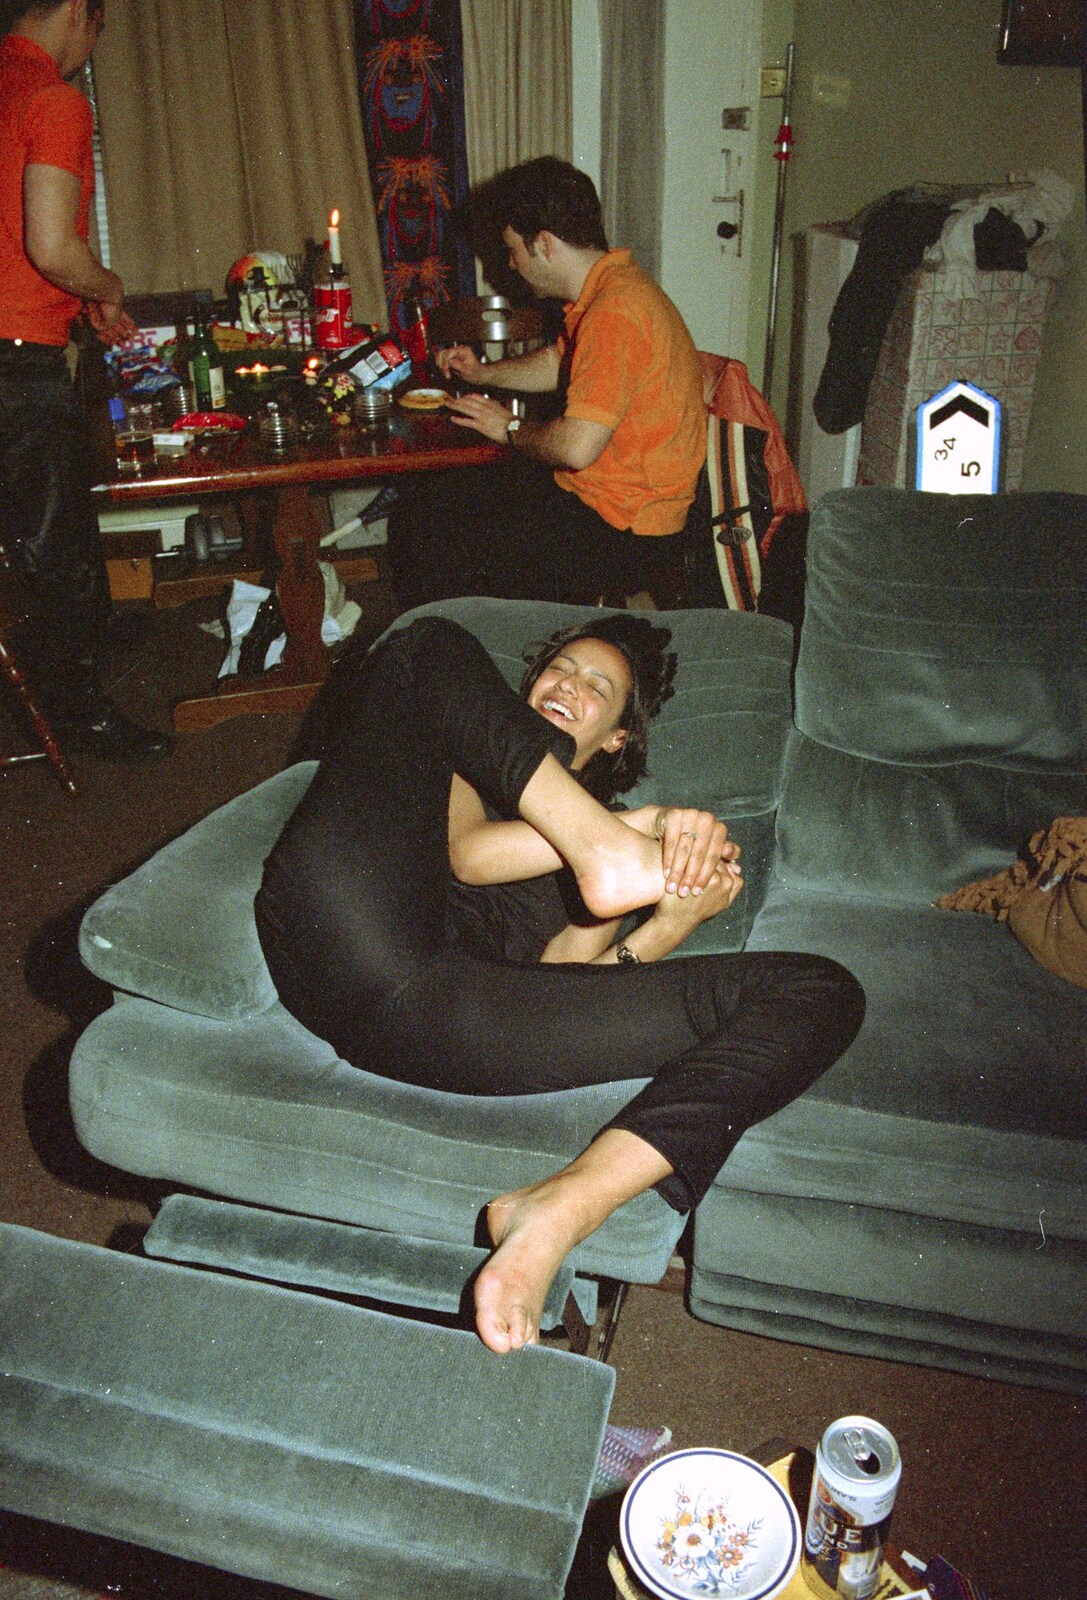 A CISU Party Round Trev's House, Cavendish Street, Ipswich - 17th May 1997: Natalie does some sort of sofa yoga